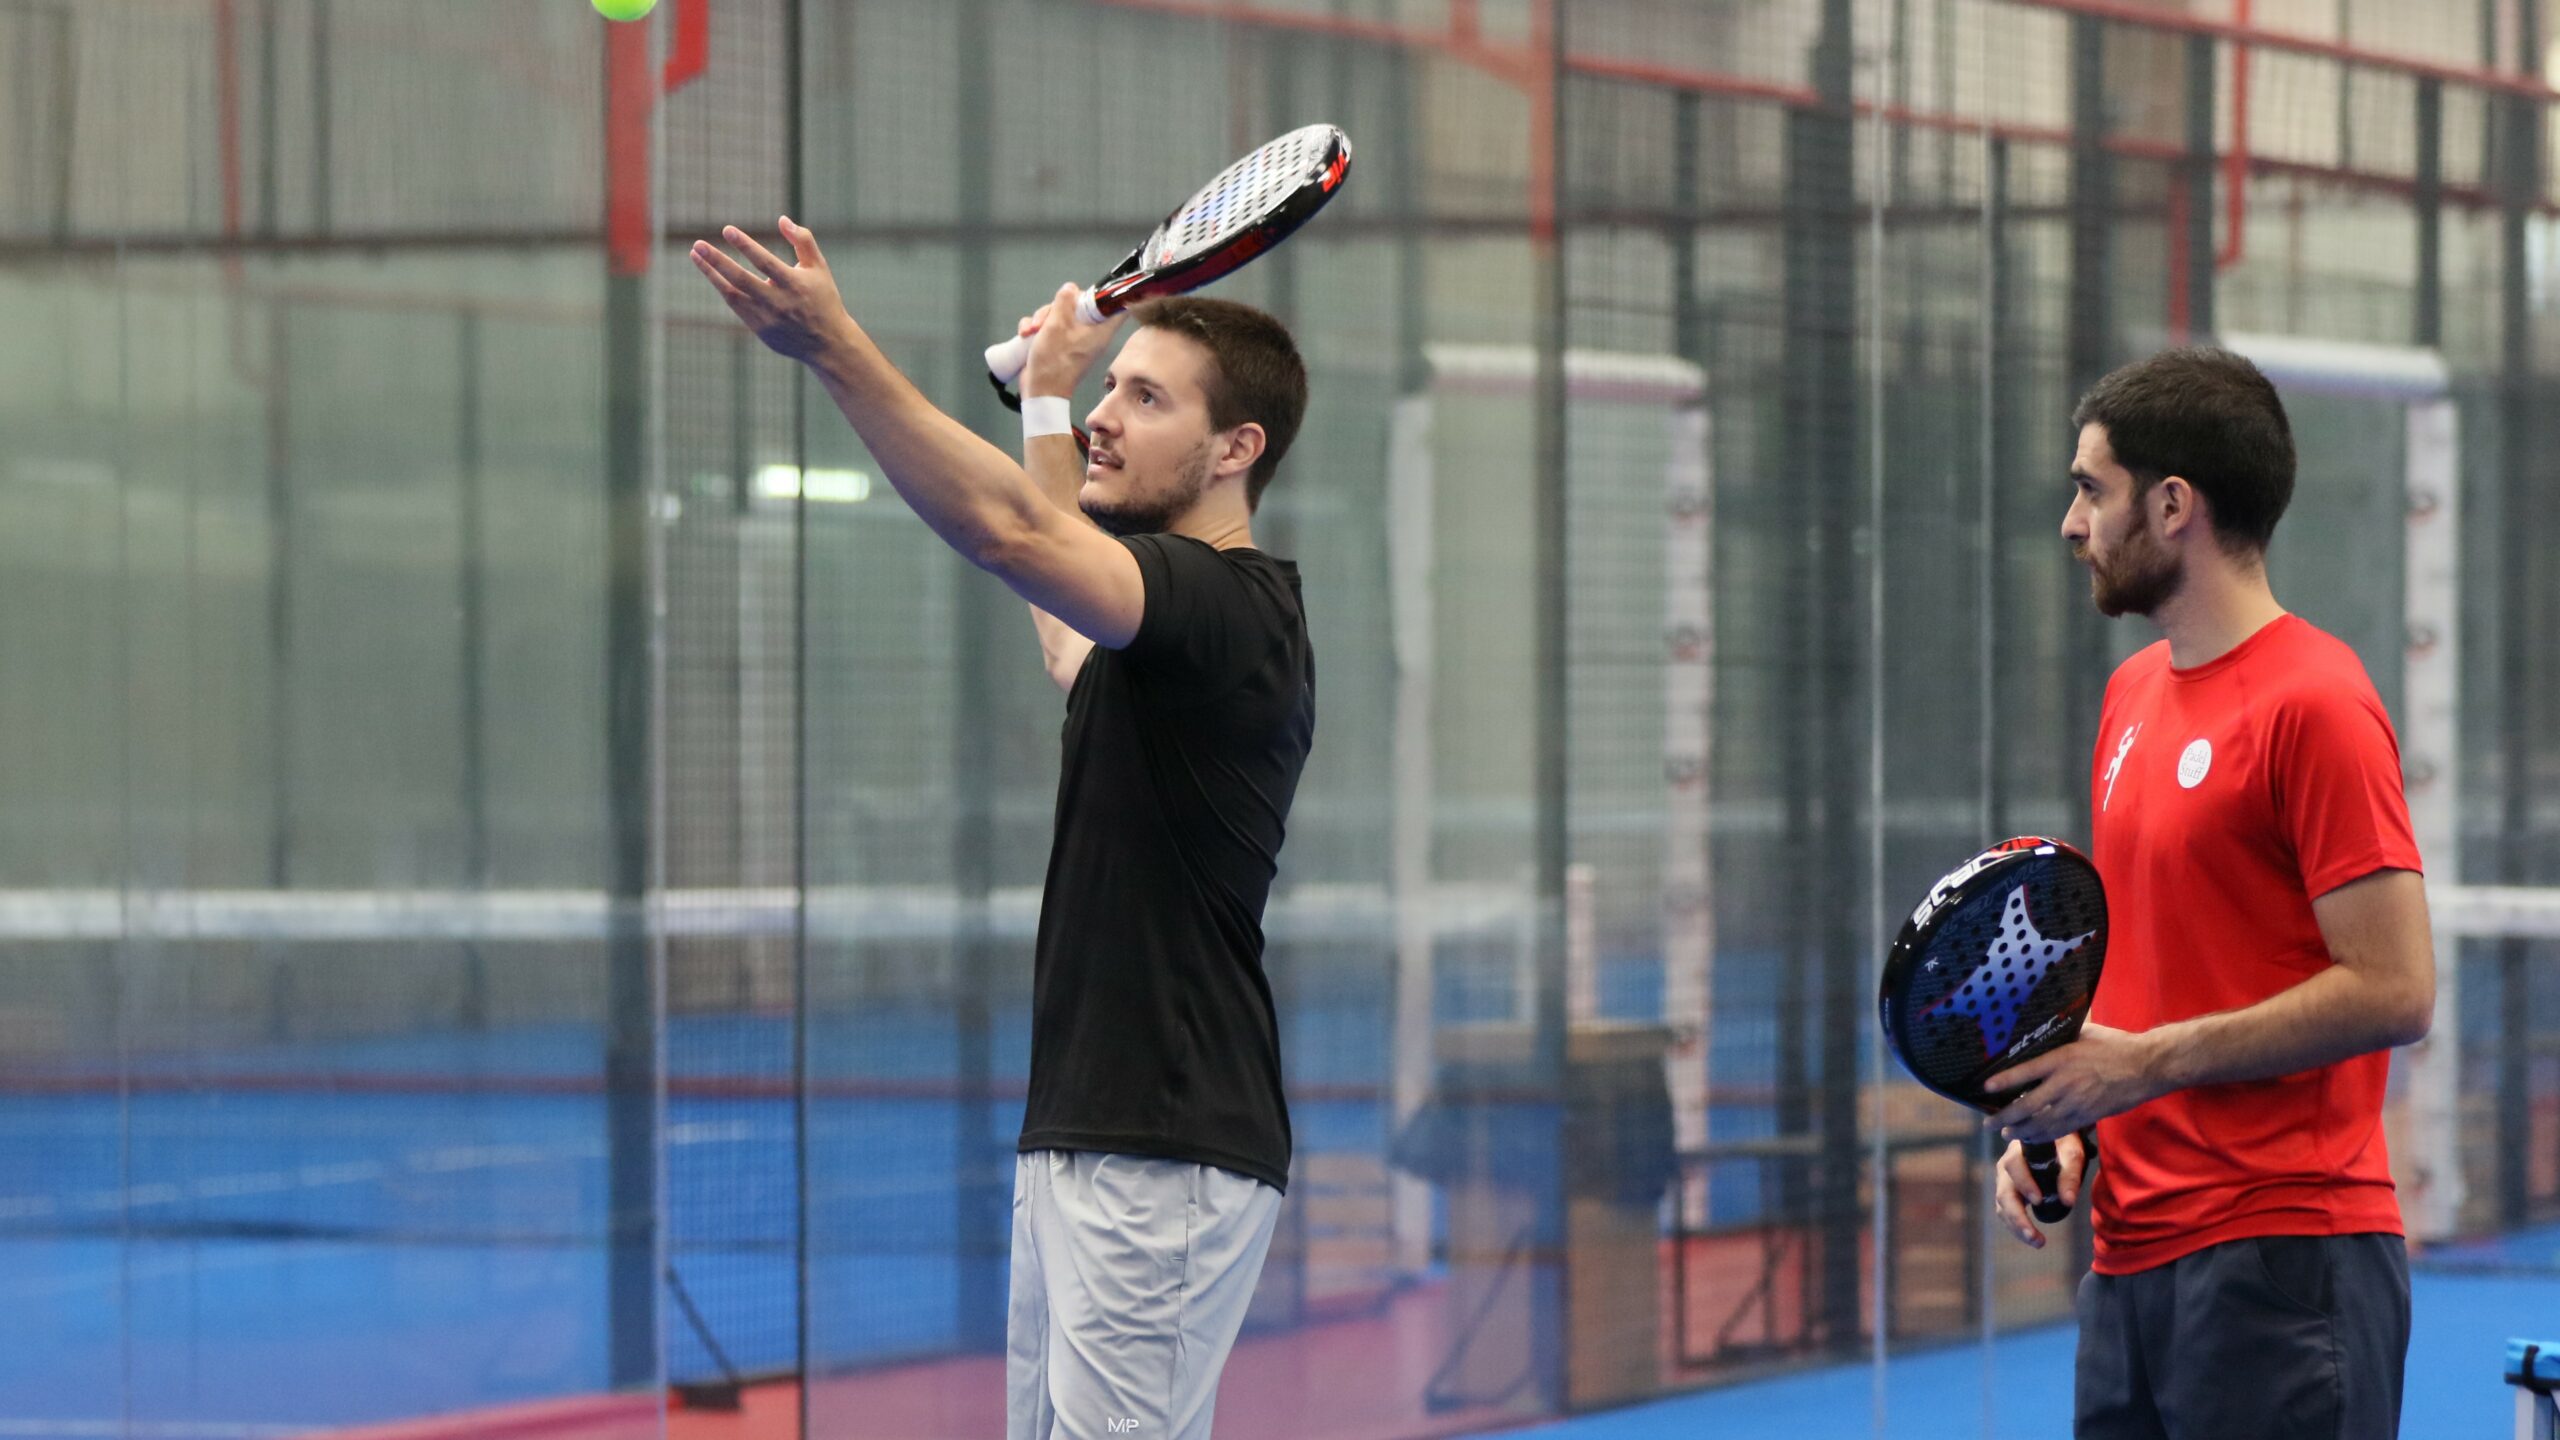 At the heart of padel – Episode 8: receiving the lob